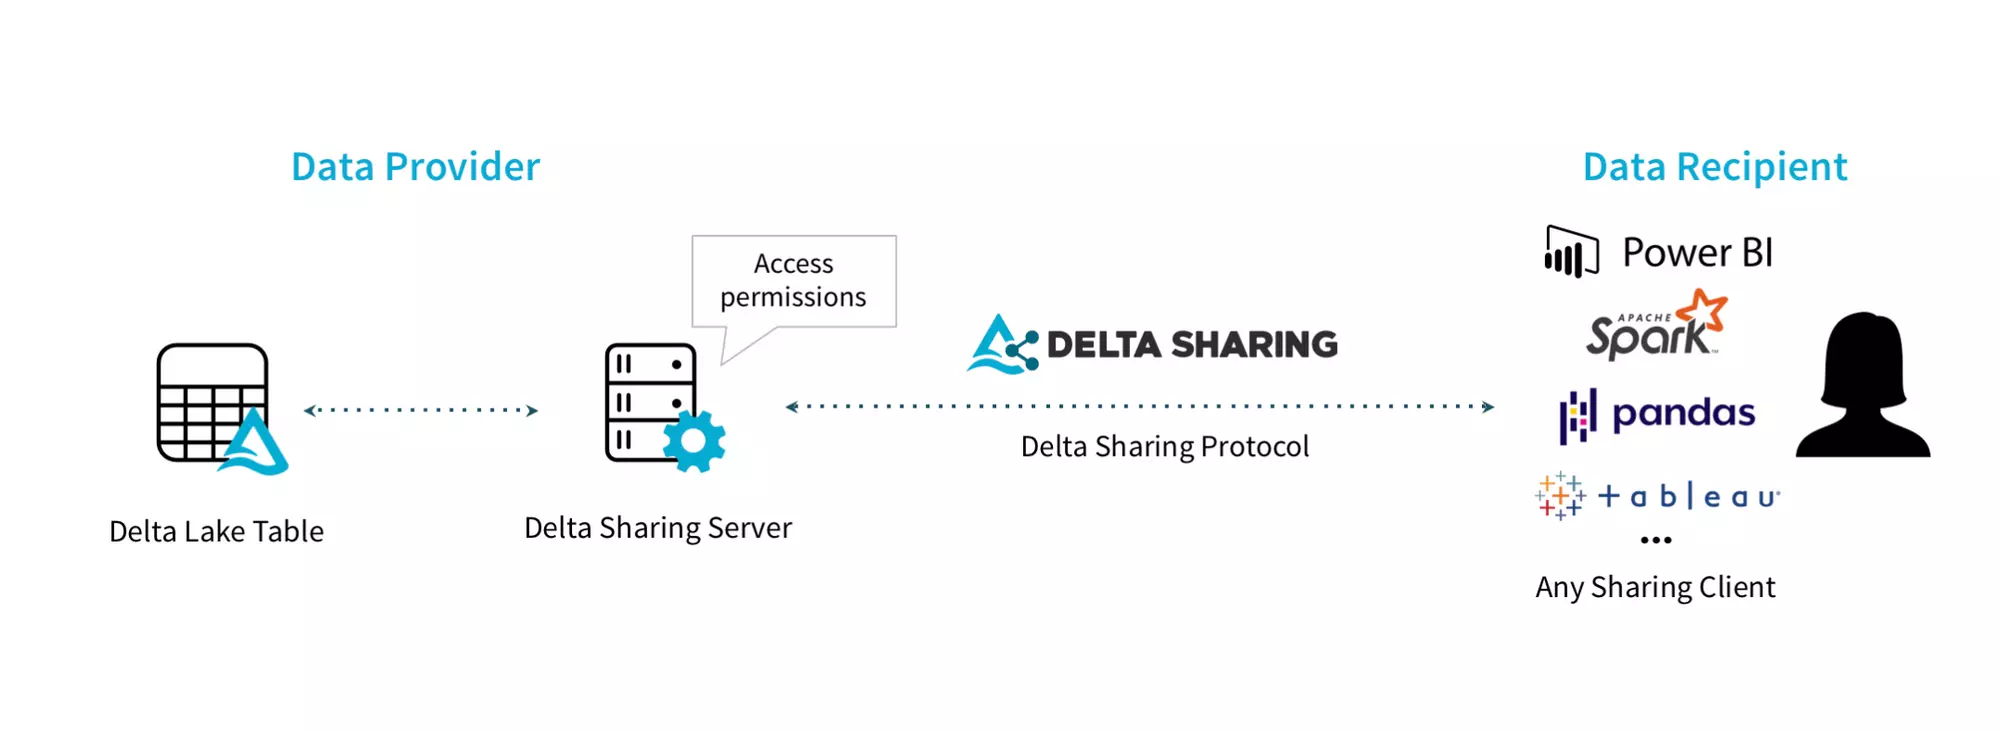 How Delta Sharing Works - Image from the official documentation of Delta Sharing 